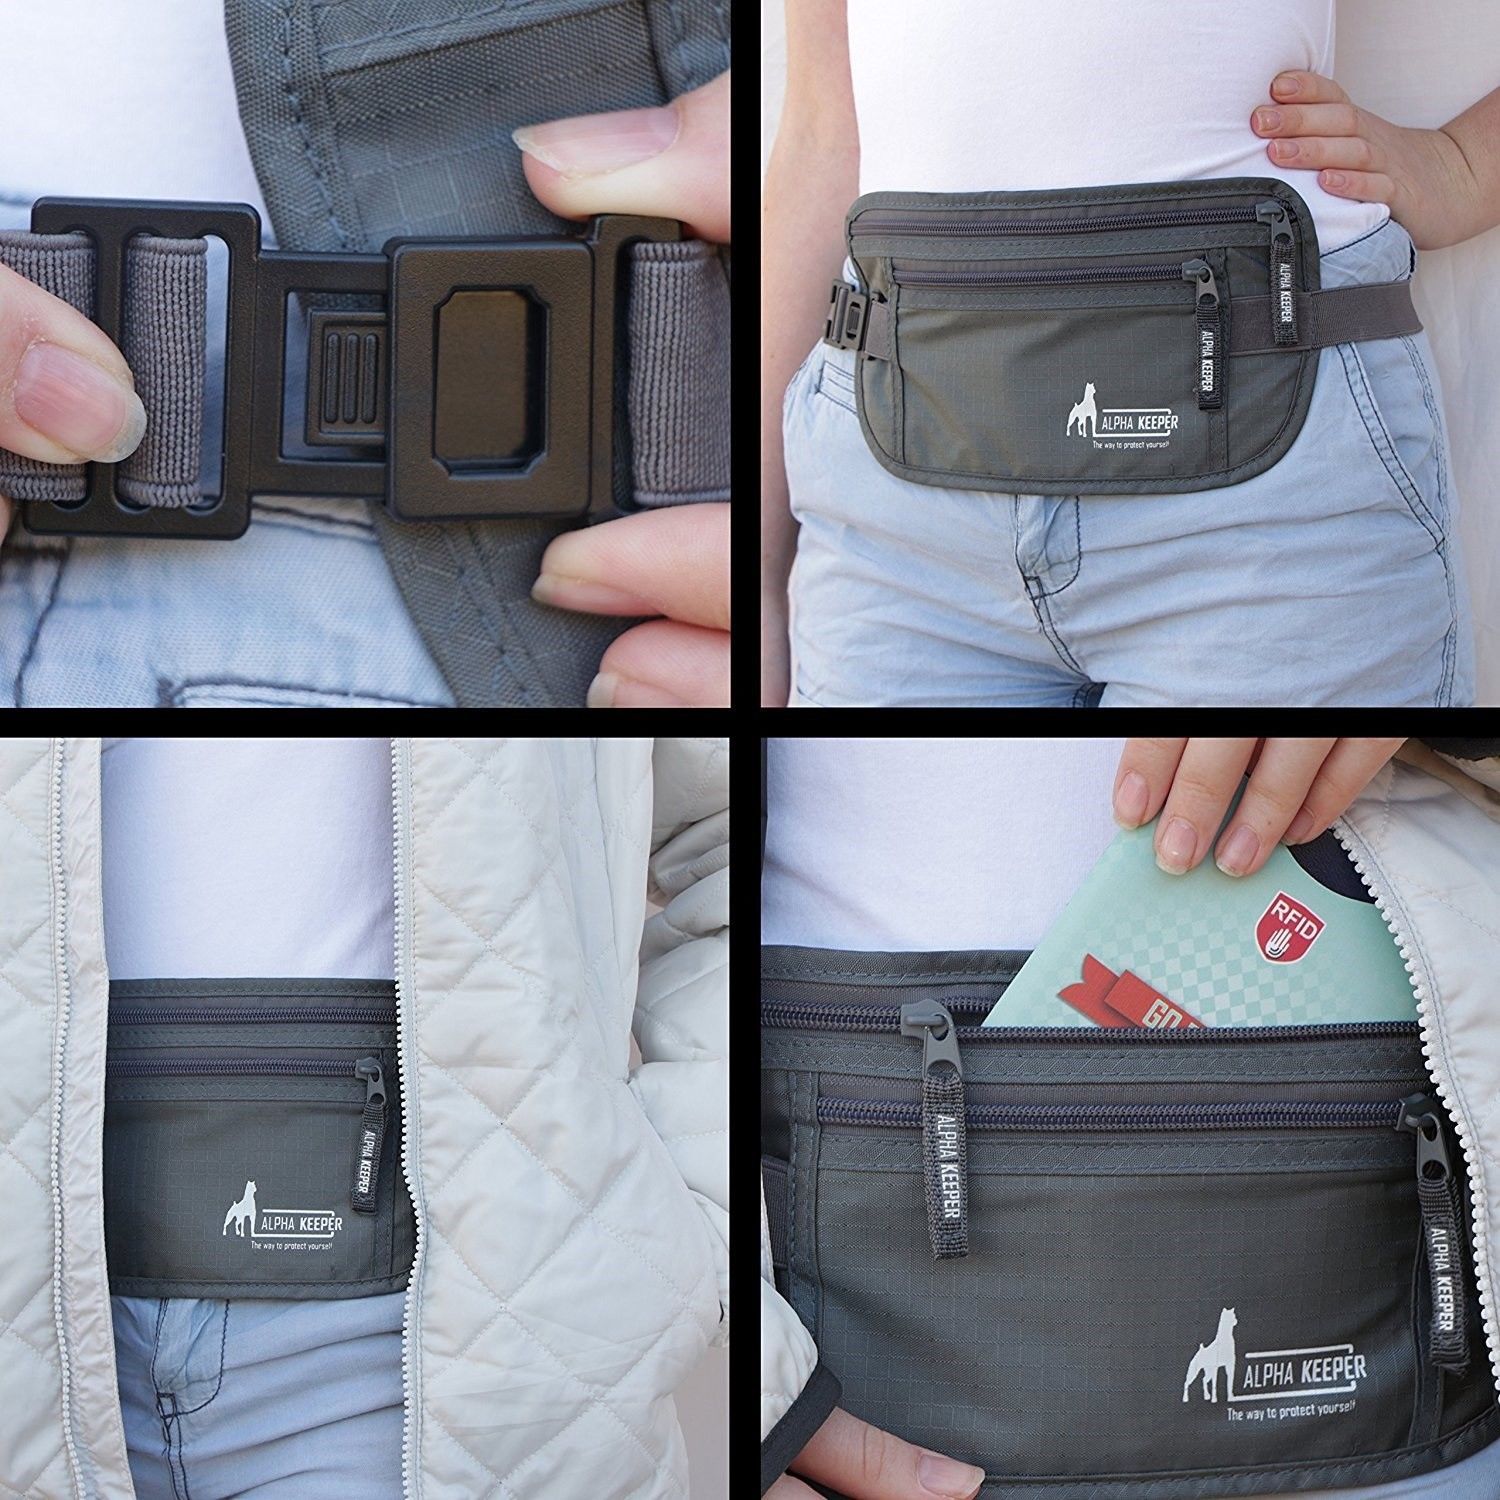 Money Belt With RFID Blocking Sleeves-Travel,Passport,Wallet,Tag,Security, Cable - $29.49